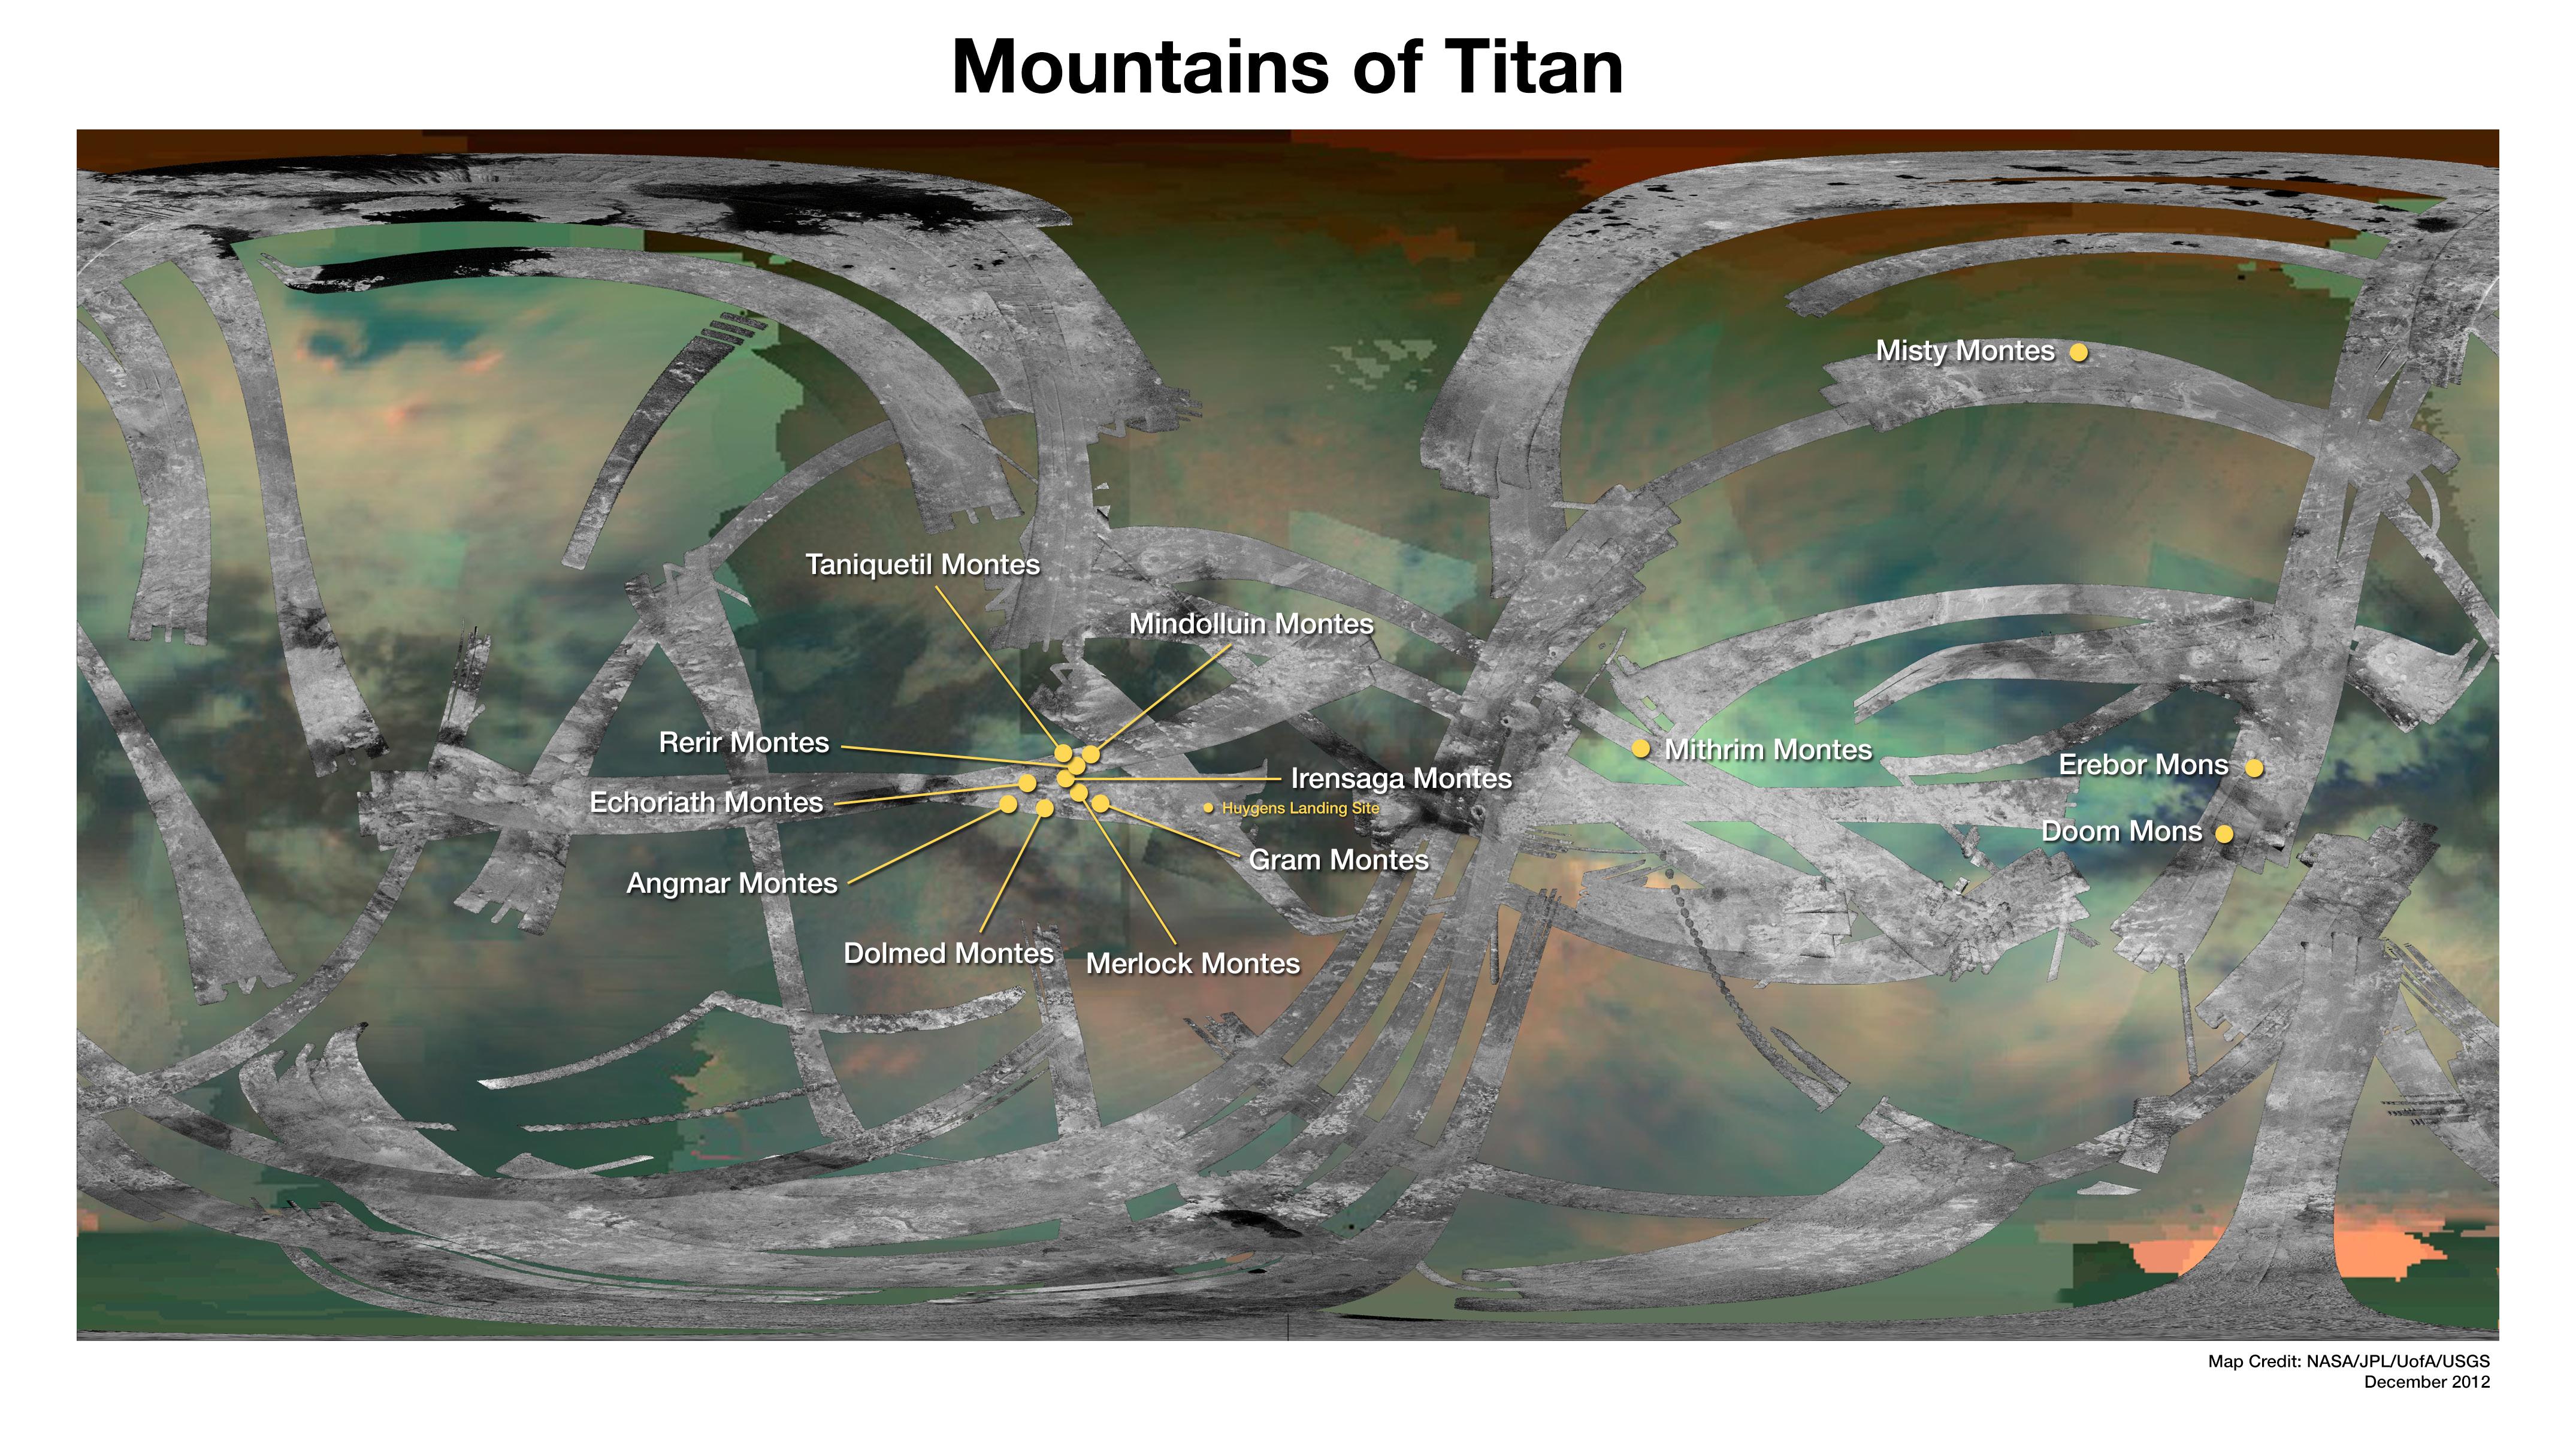 Map of Saturn’s moon Titan identifies the locations of mountains that have been named by the International Astronomical Union.